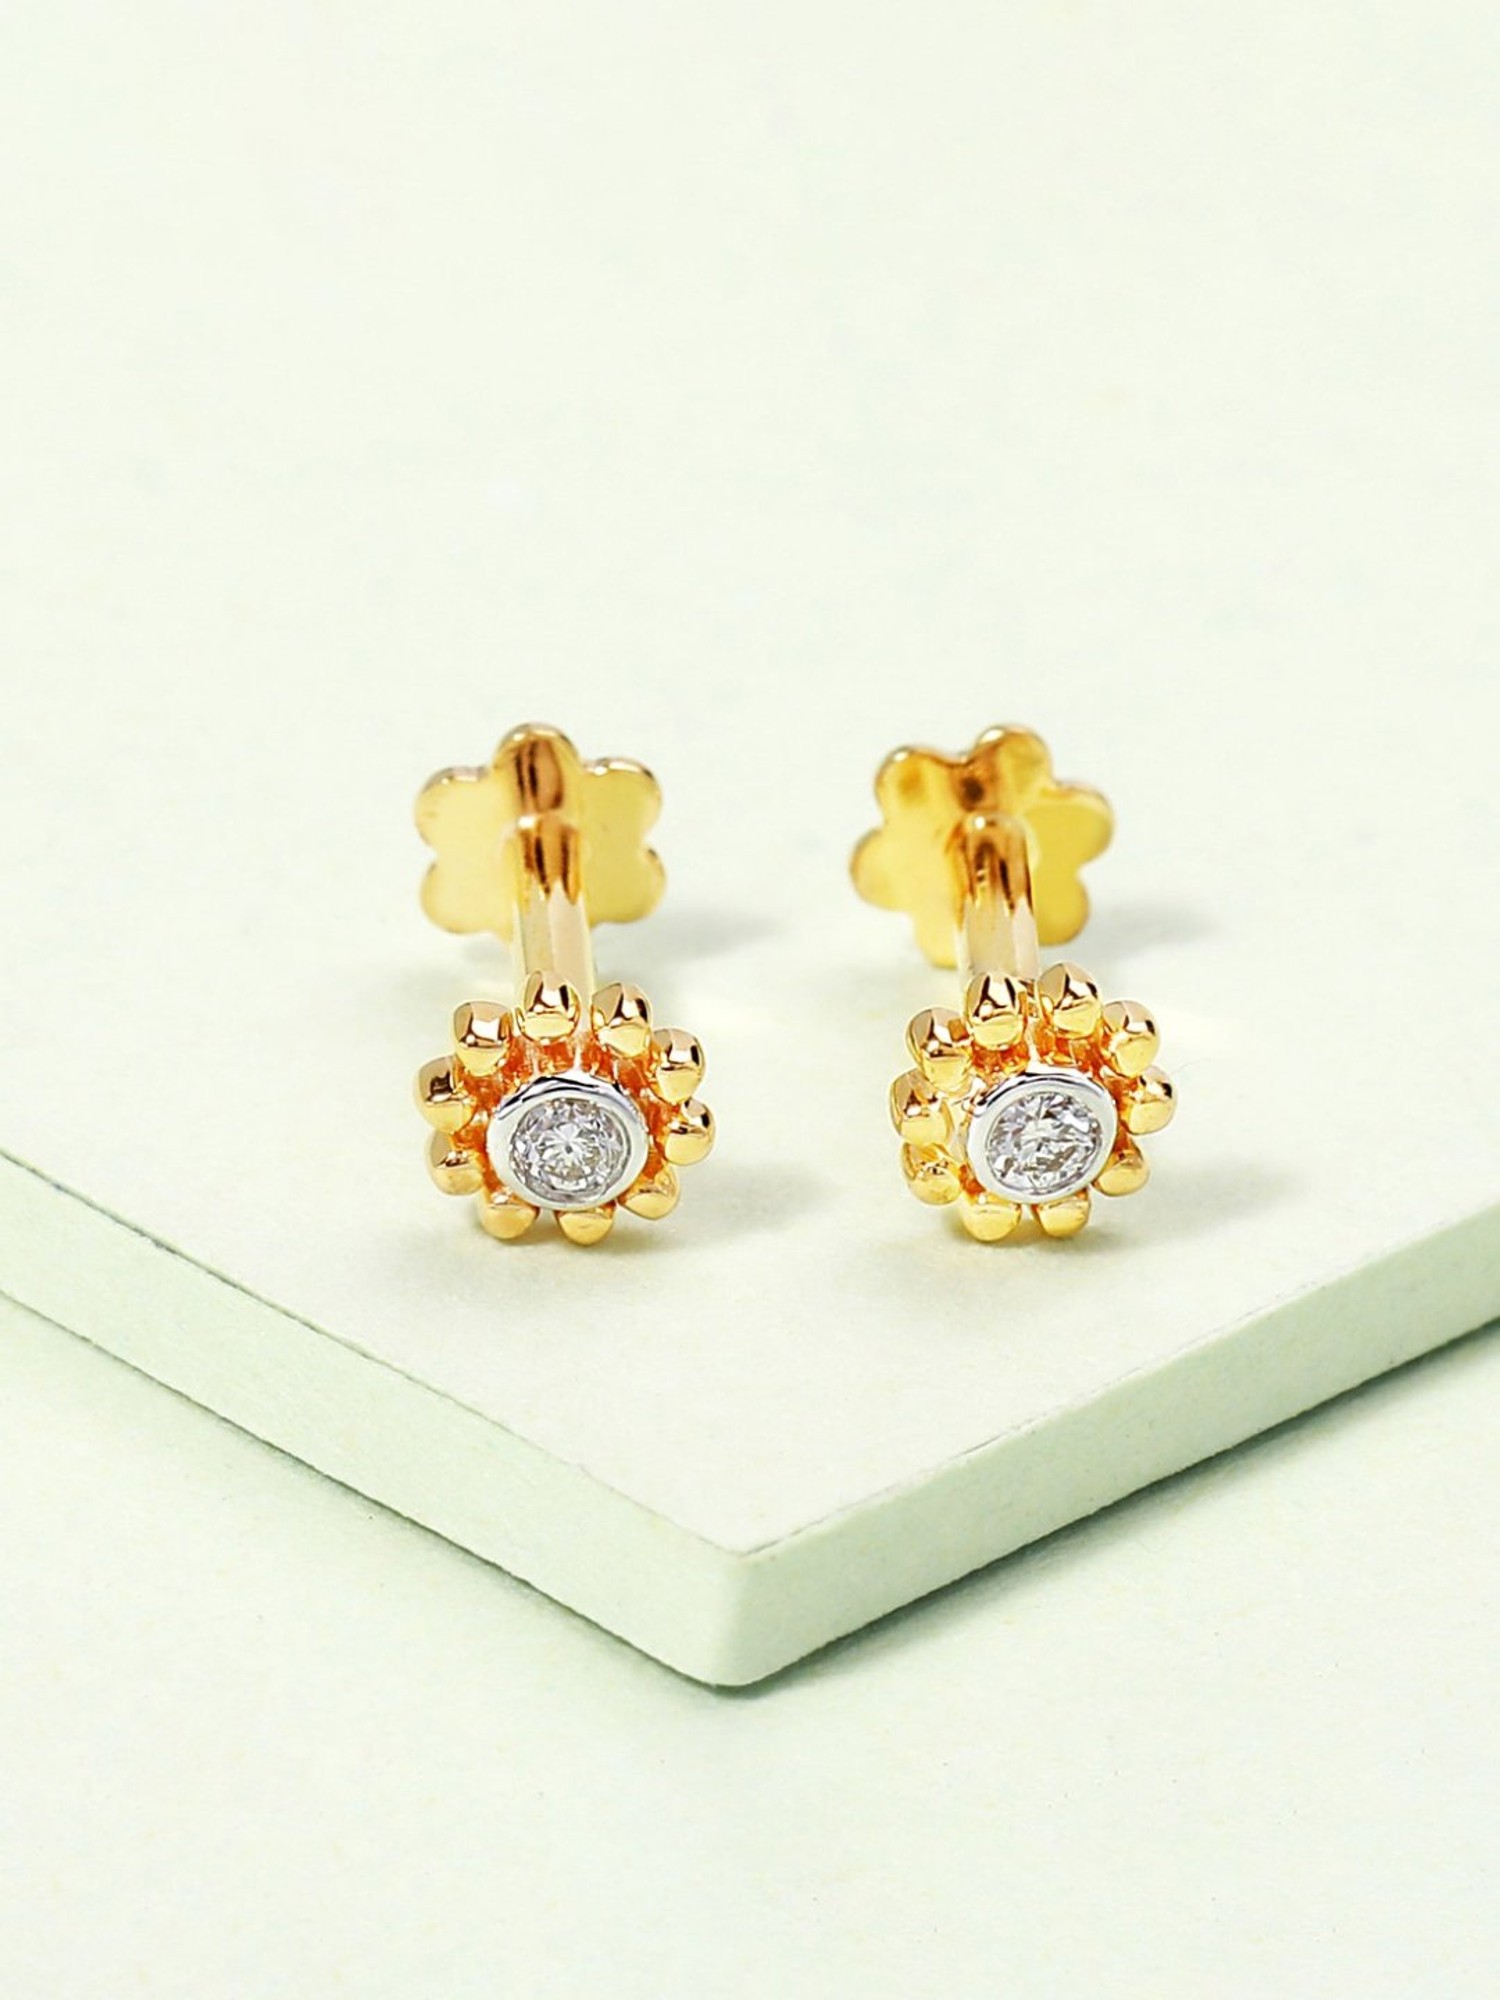 Buy CANDERE  A KALYAN JEWELLERS COMPANY 22Kt 916 BIS Hallmark Yellow  Gold Stud Earrings for Women at Amazonin